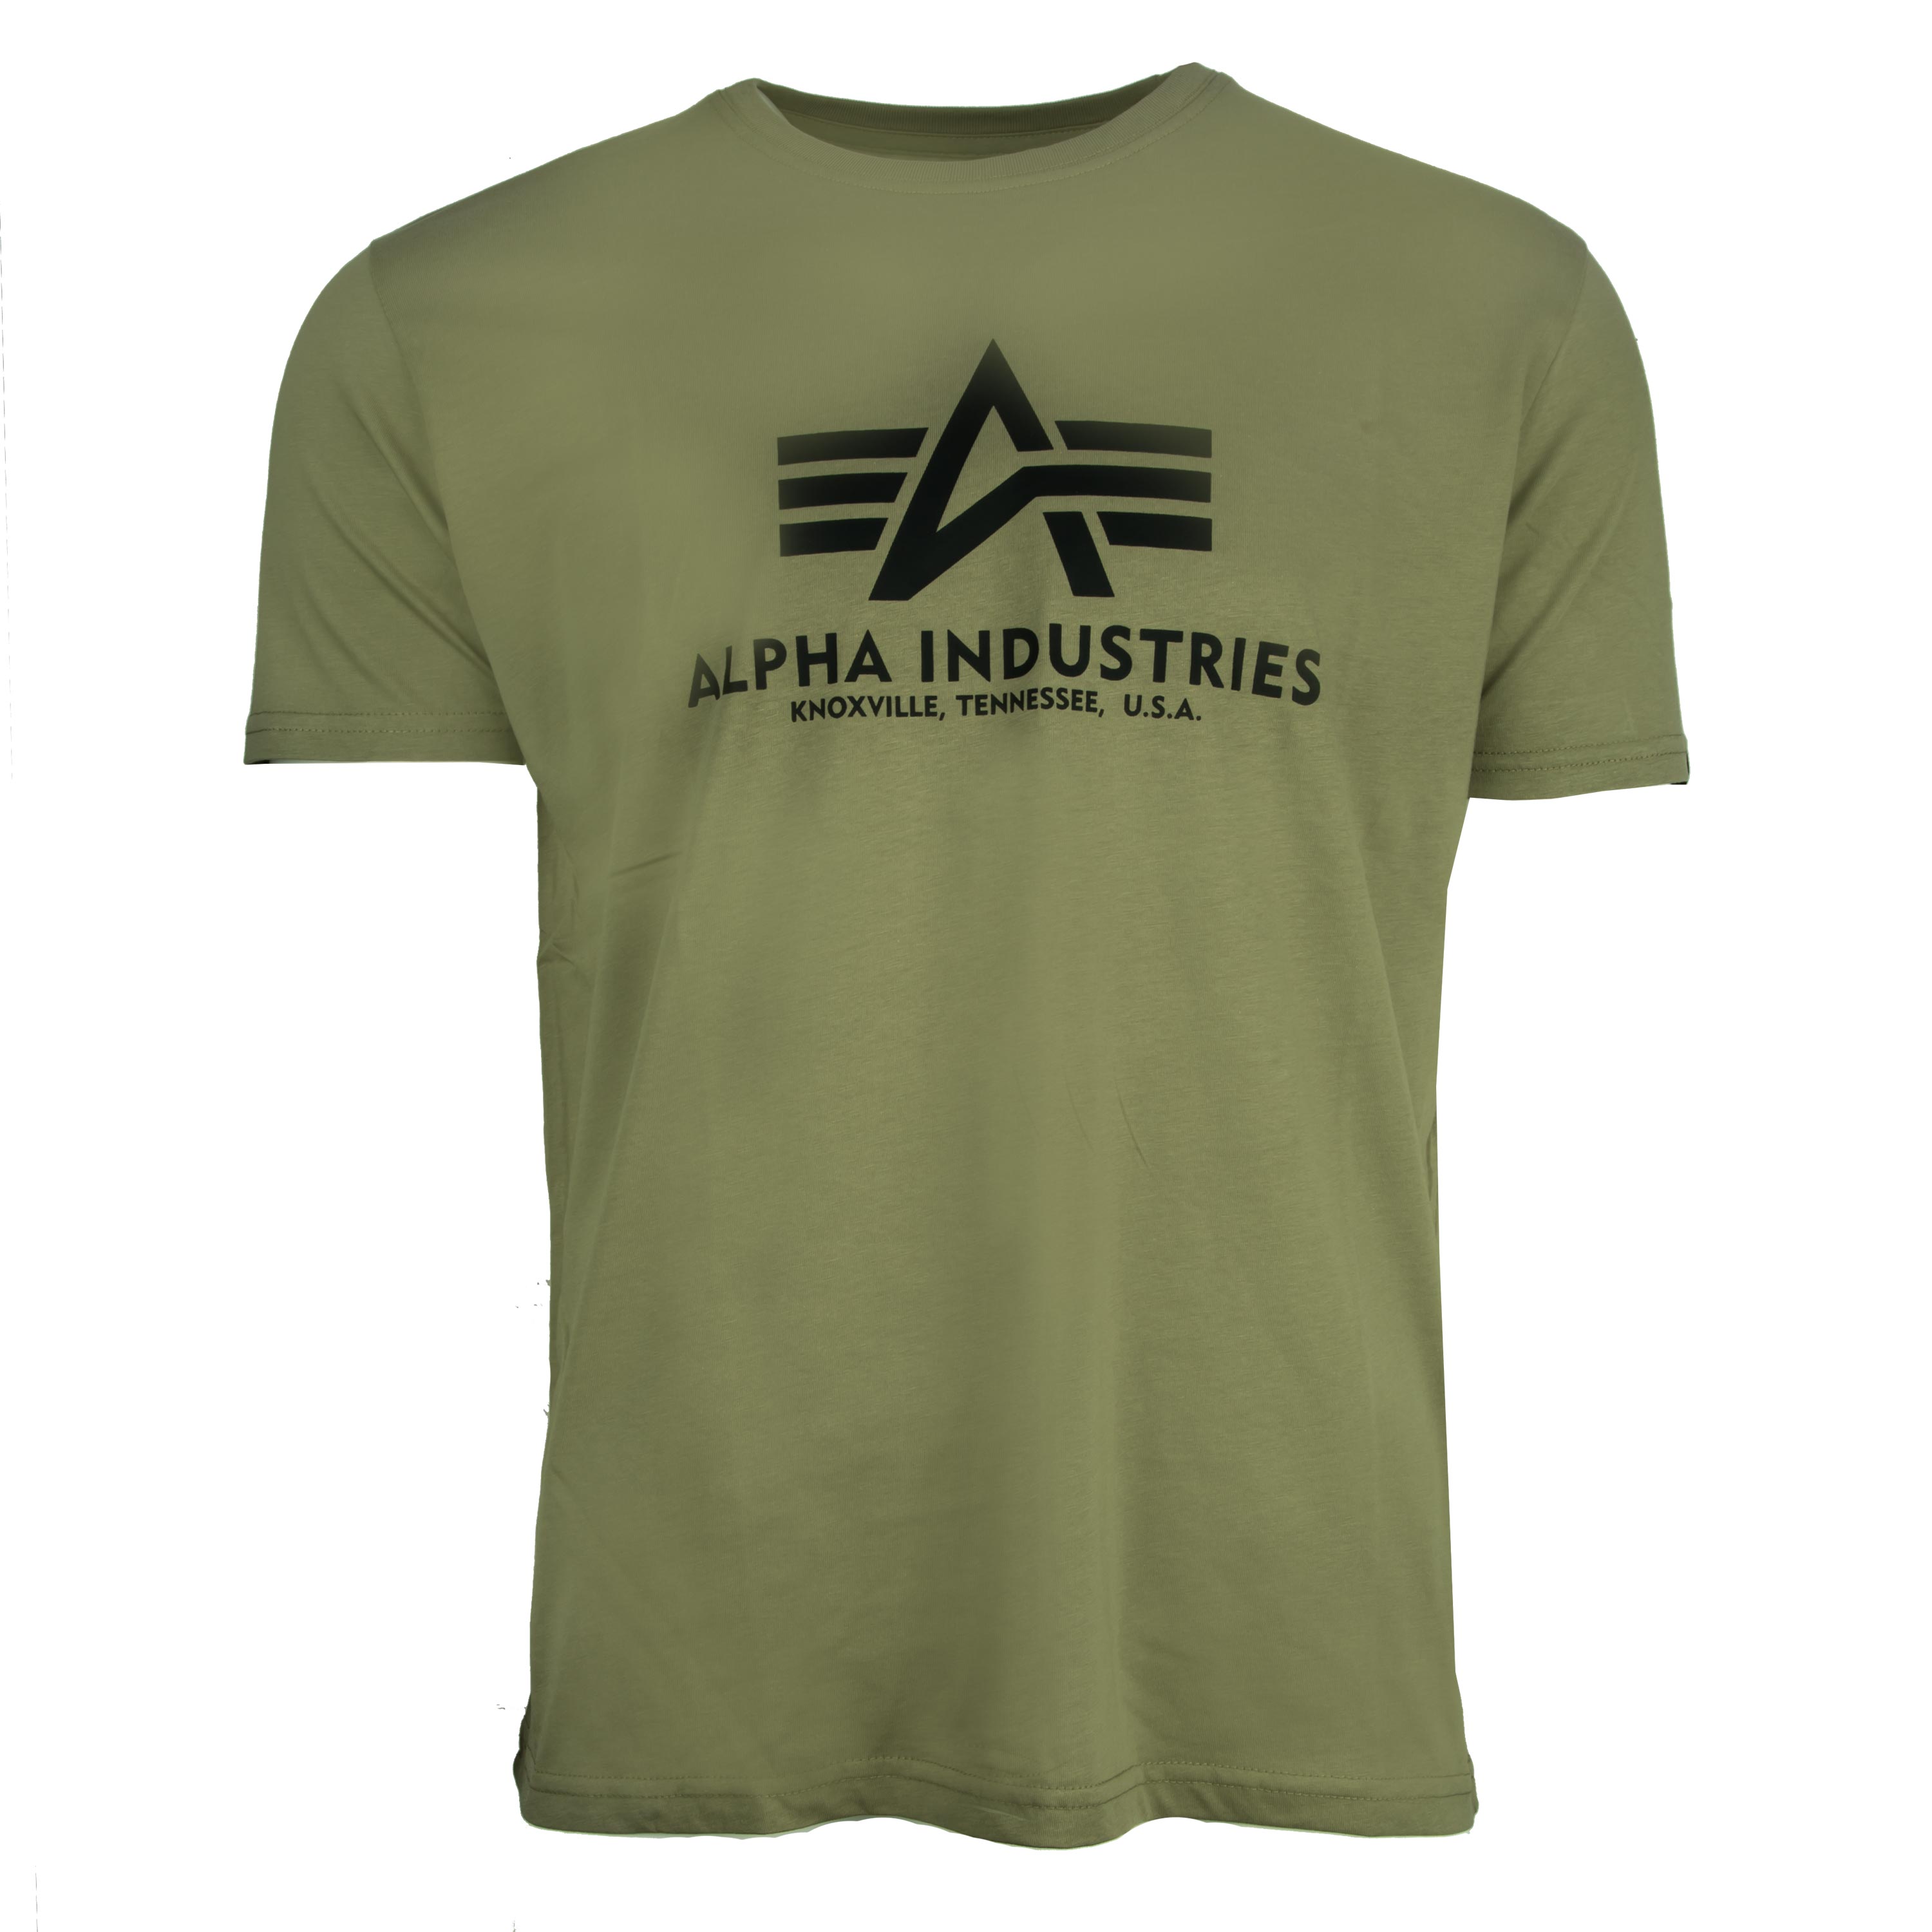 Industries by T the Alpha ASMC Purchase Basic T-Shirt olive